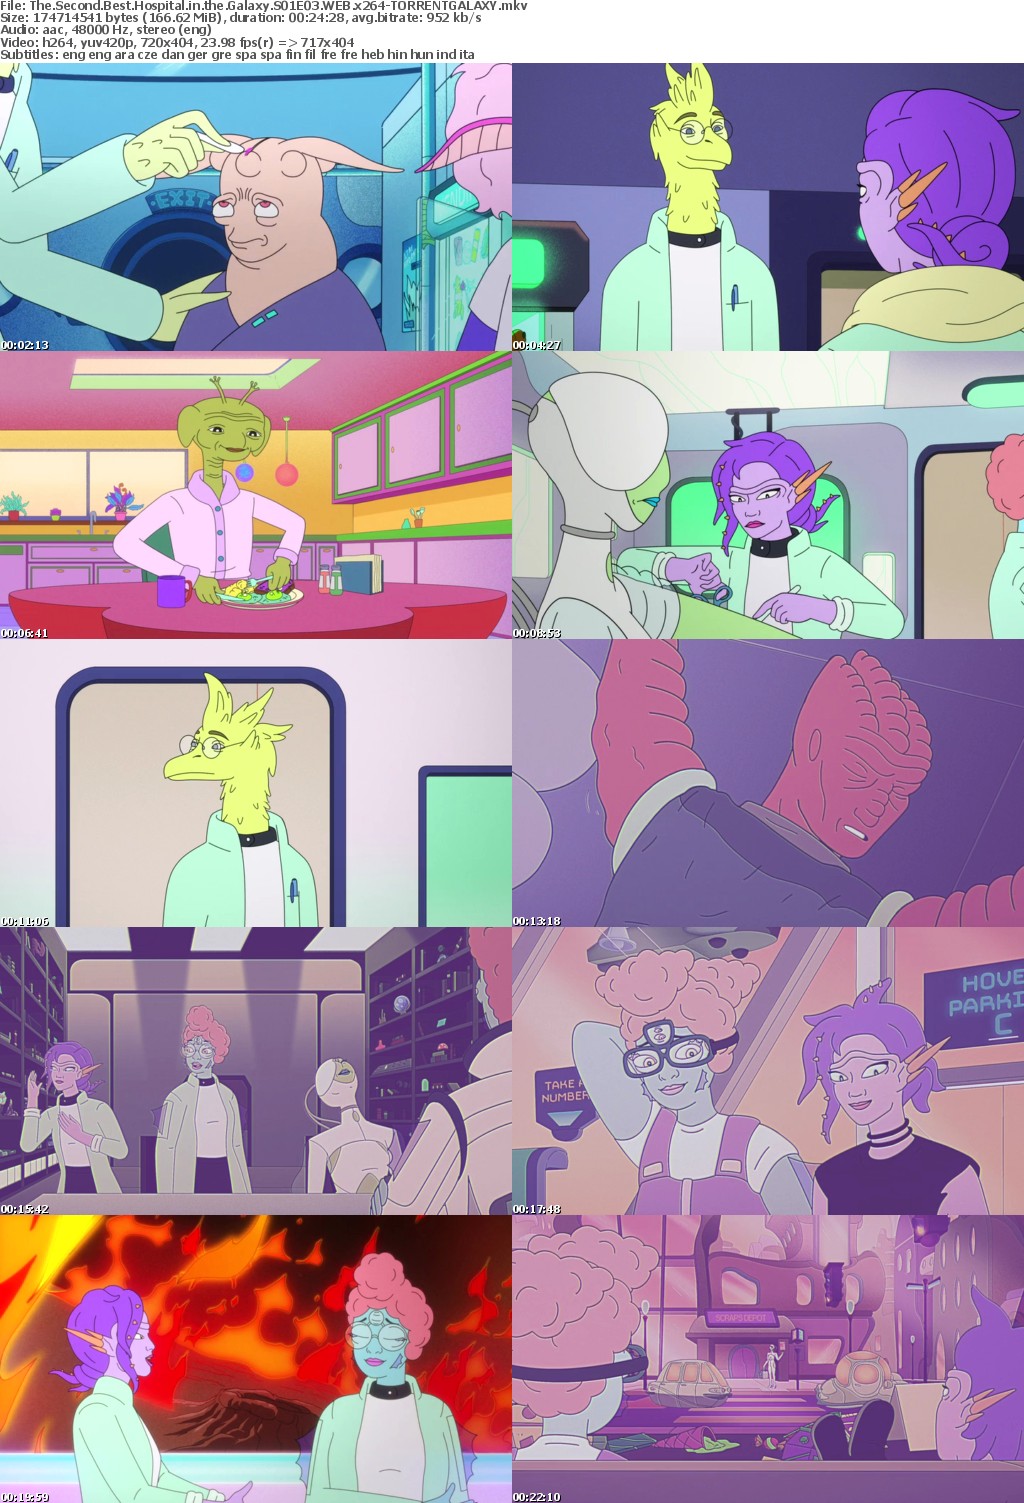 The Second Best Hospital in the Galaxy S01E03 WEB x264-GALAXY